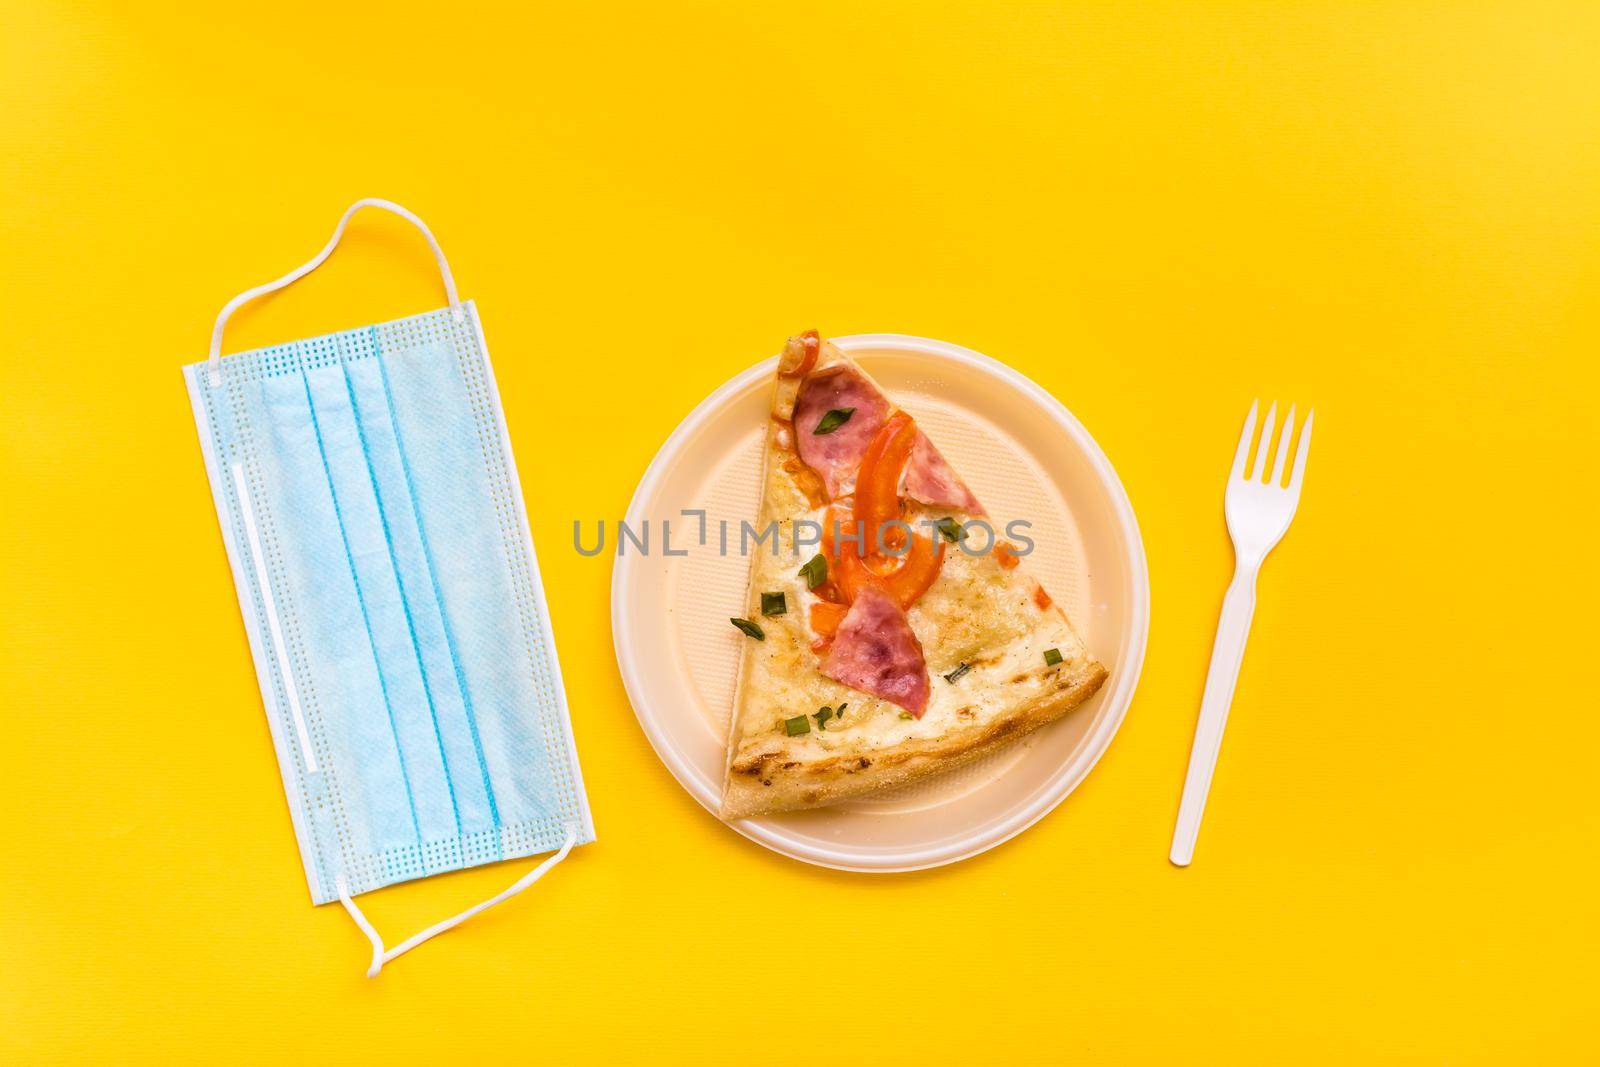 Takeaway and delivery. A slice of pizza in a disposable plastic plate, a protective mask and a fork on a yellow background